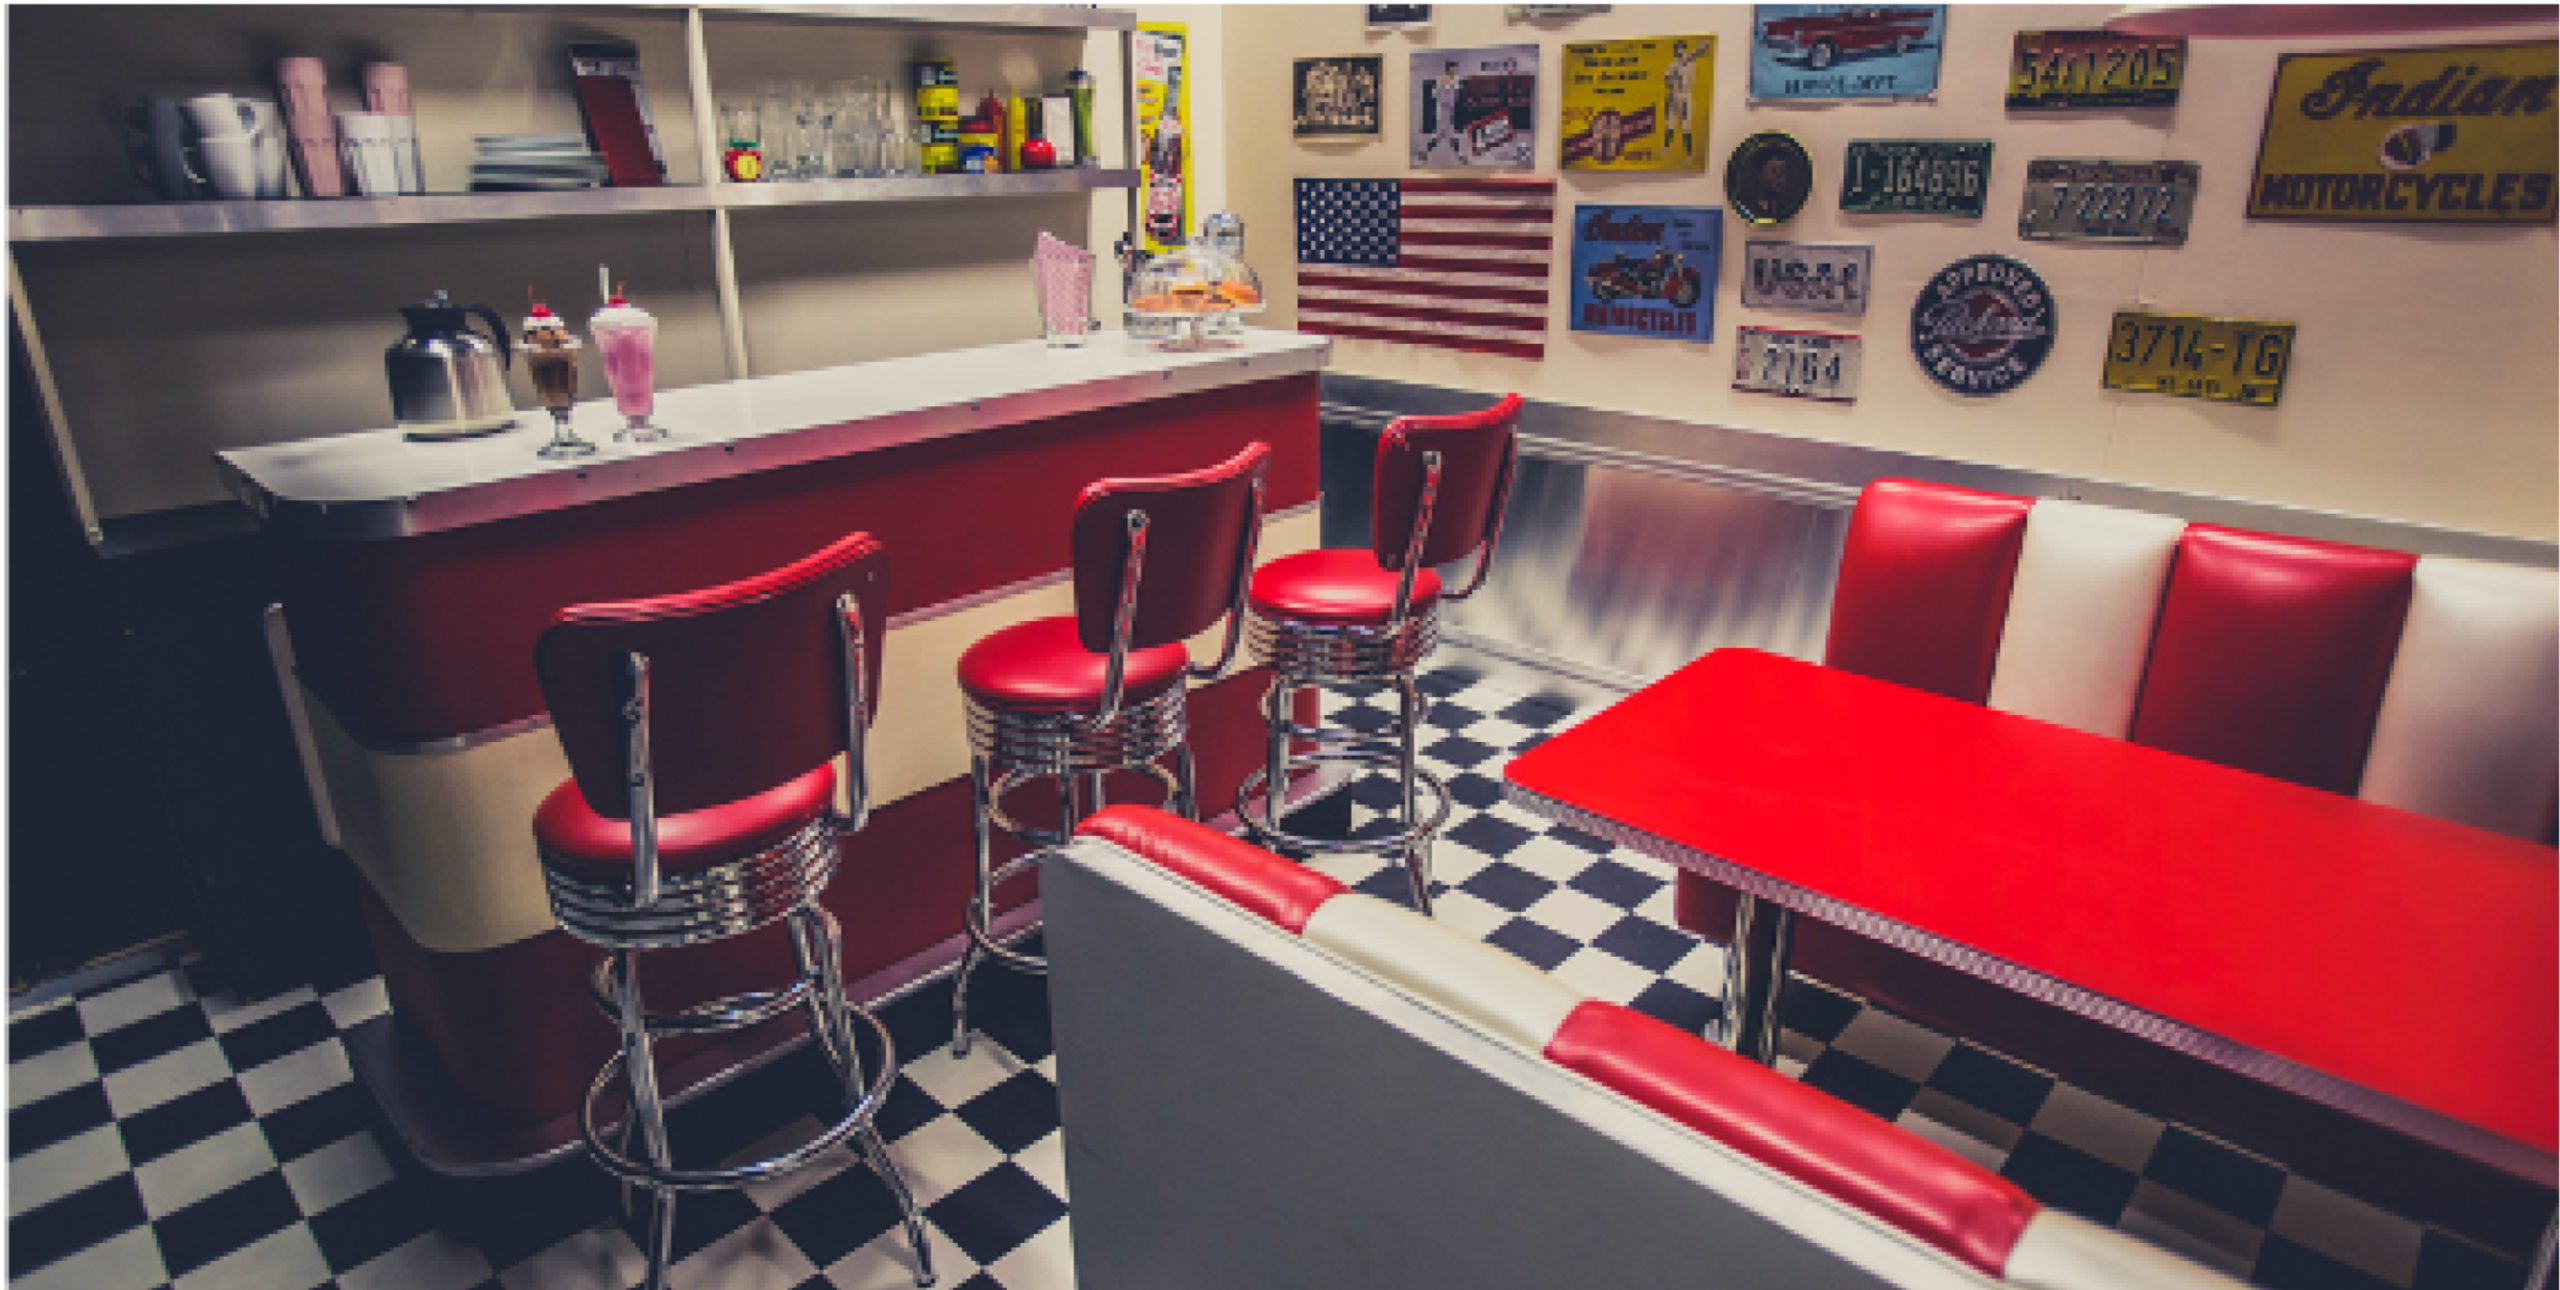 An American themed diner with milkshake on the counter